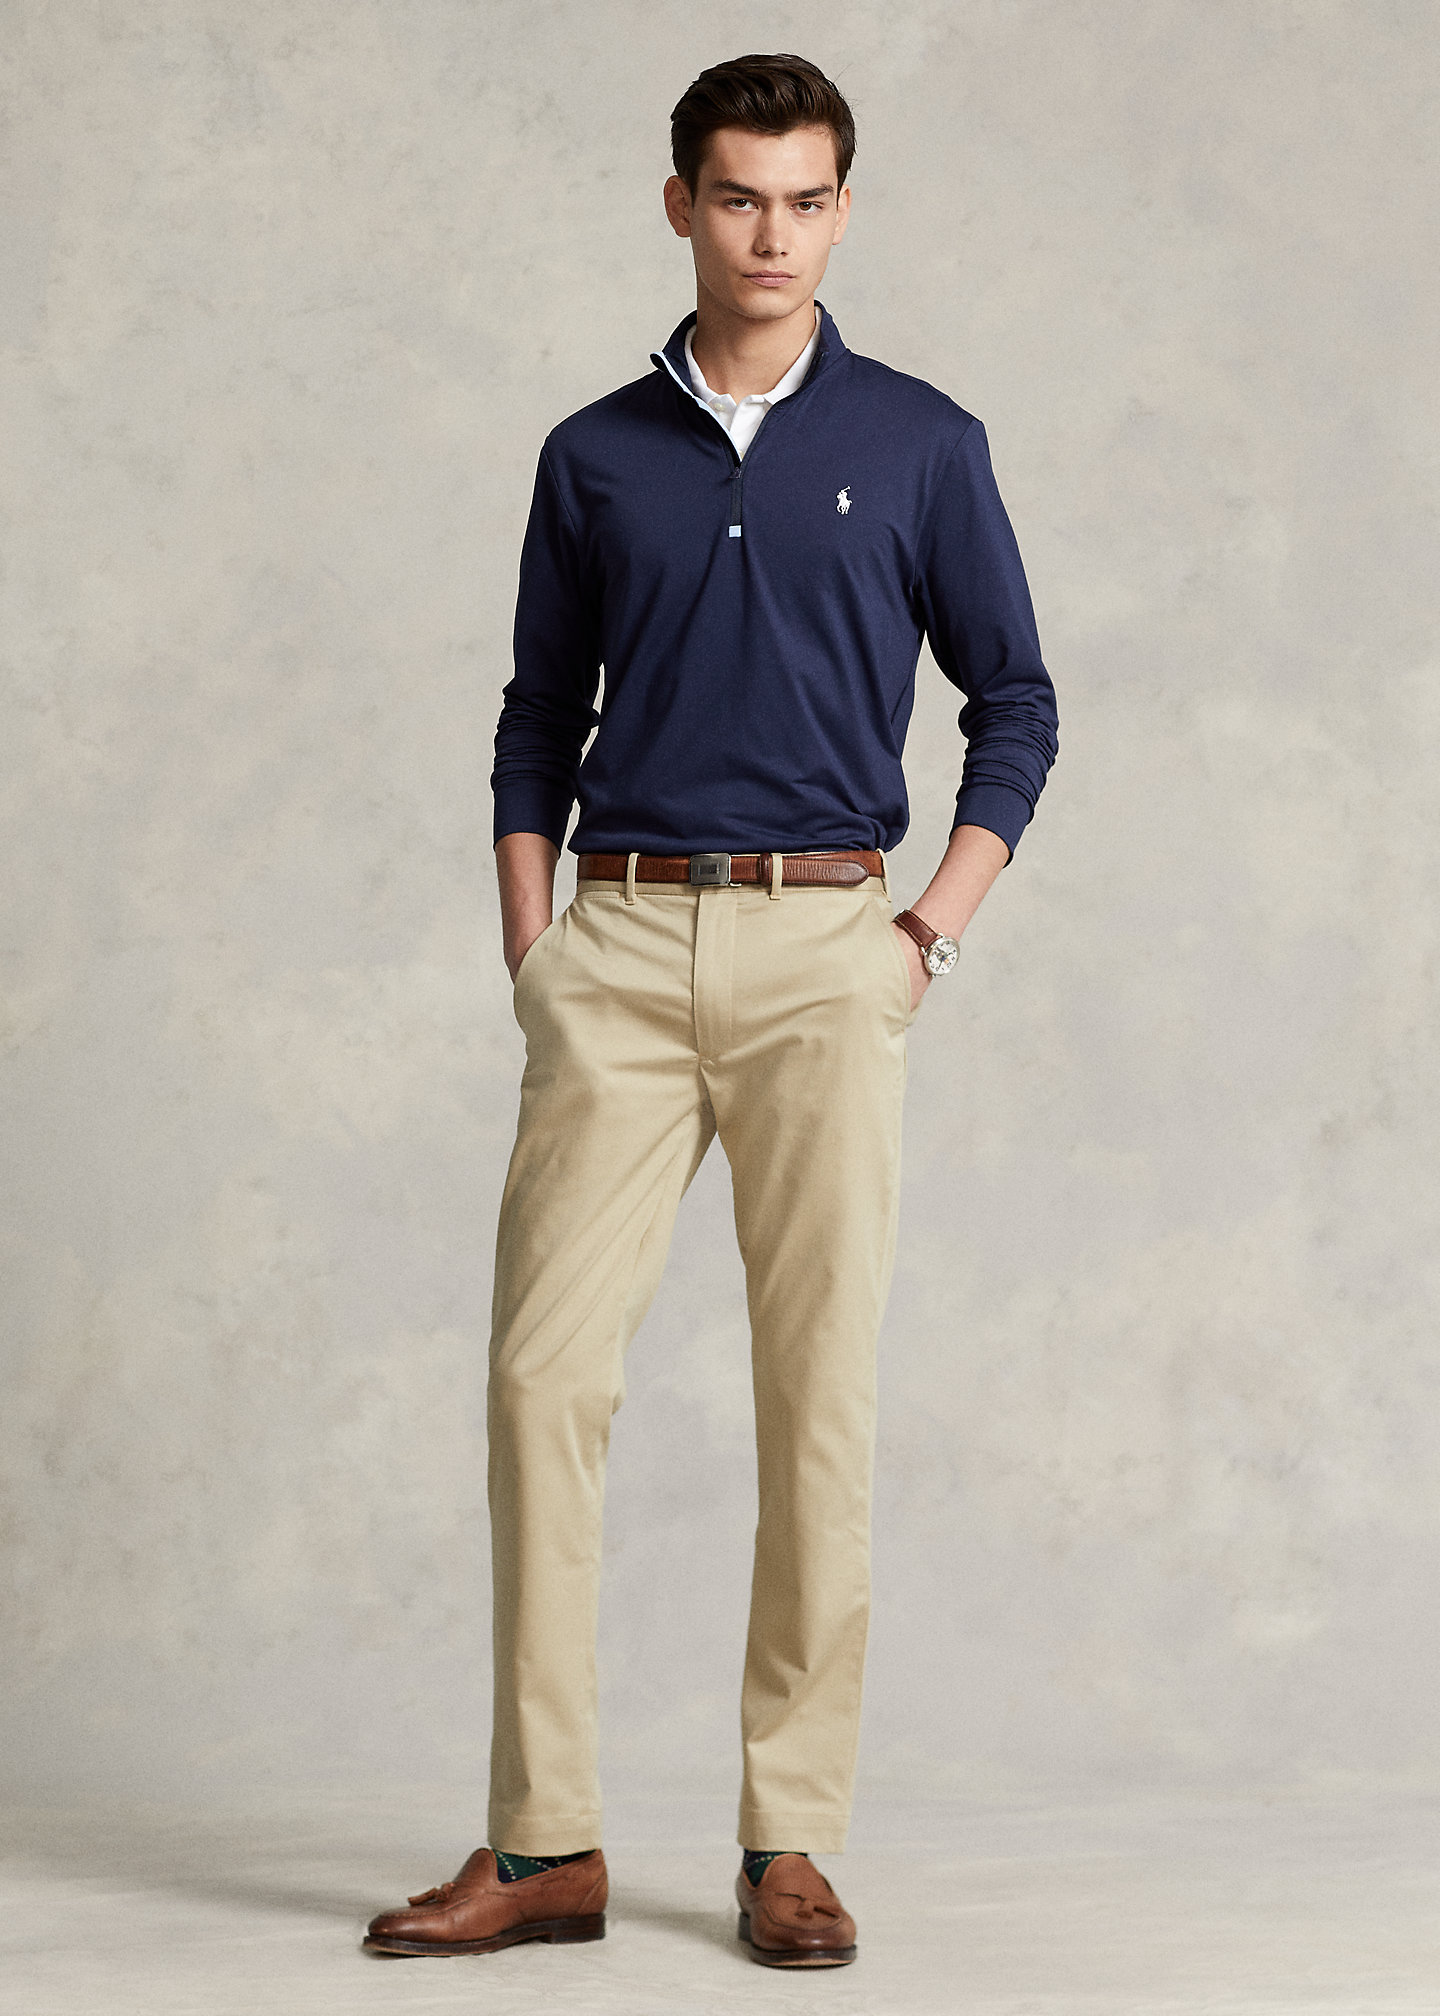 How To Wear Chinos With Every Style Imaginable  OnPointFresh